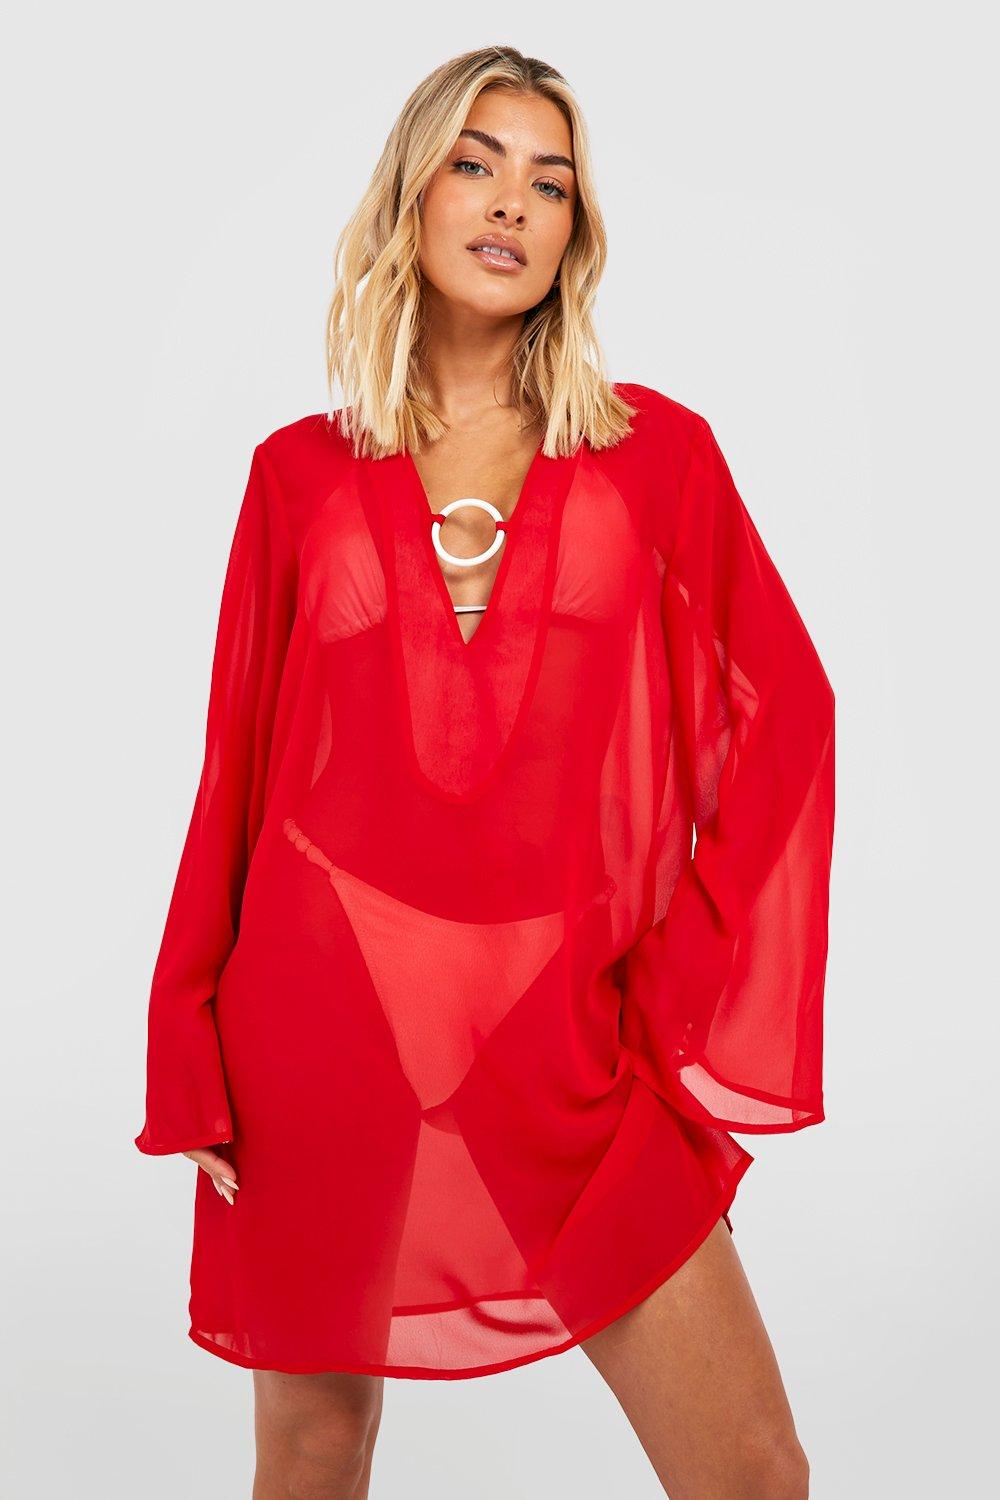 O-ring Plunge Beach Cover-up Kaftan